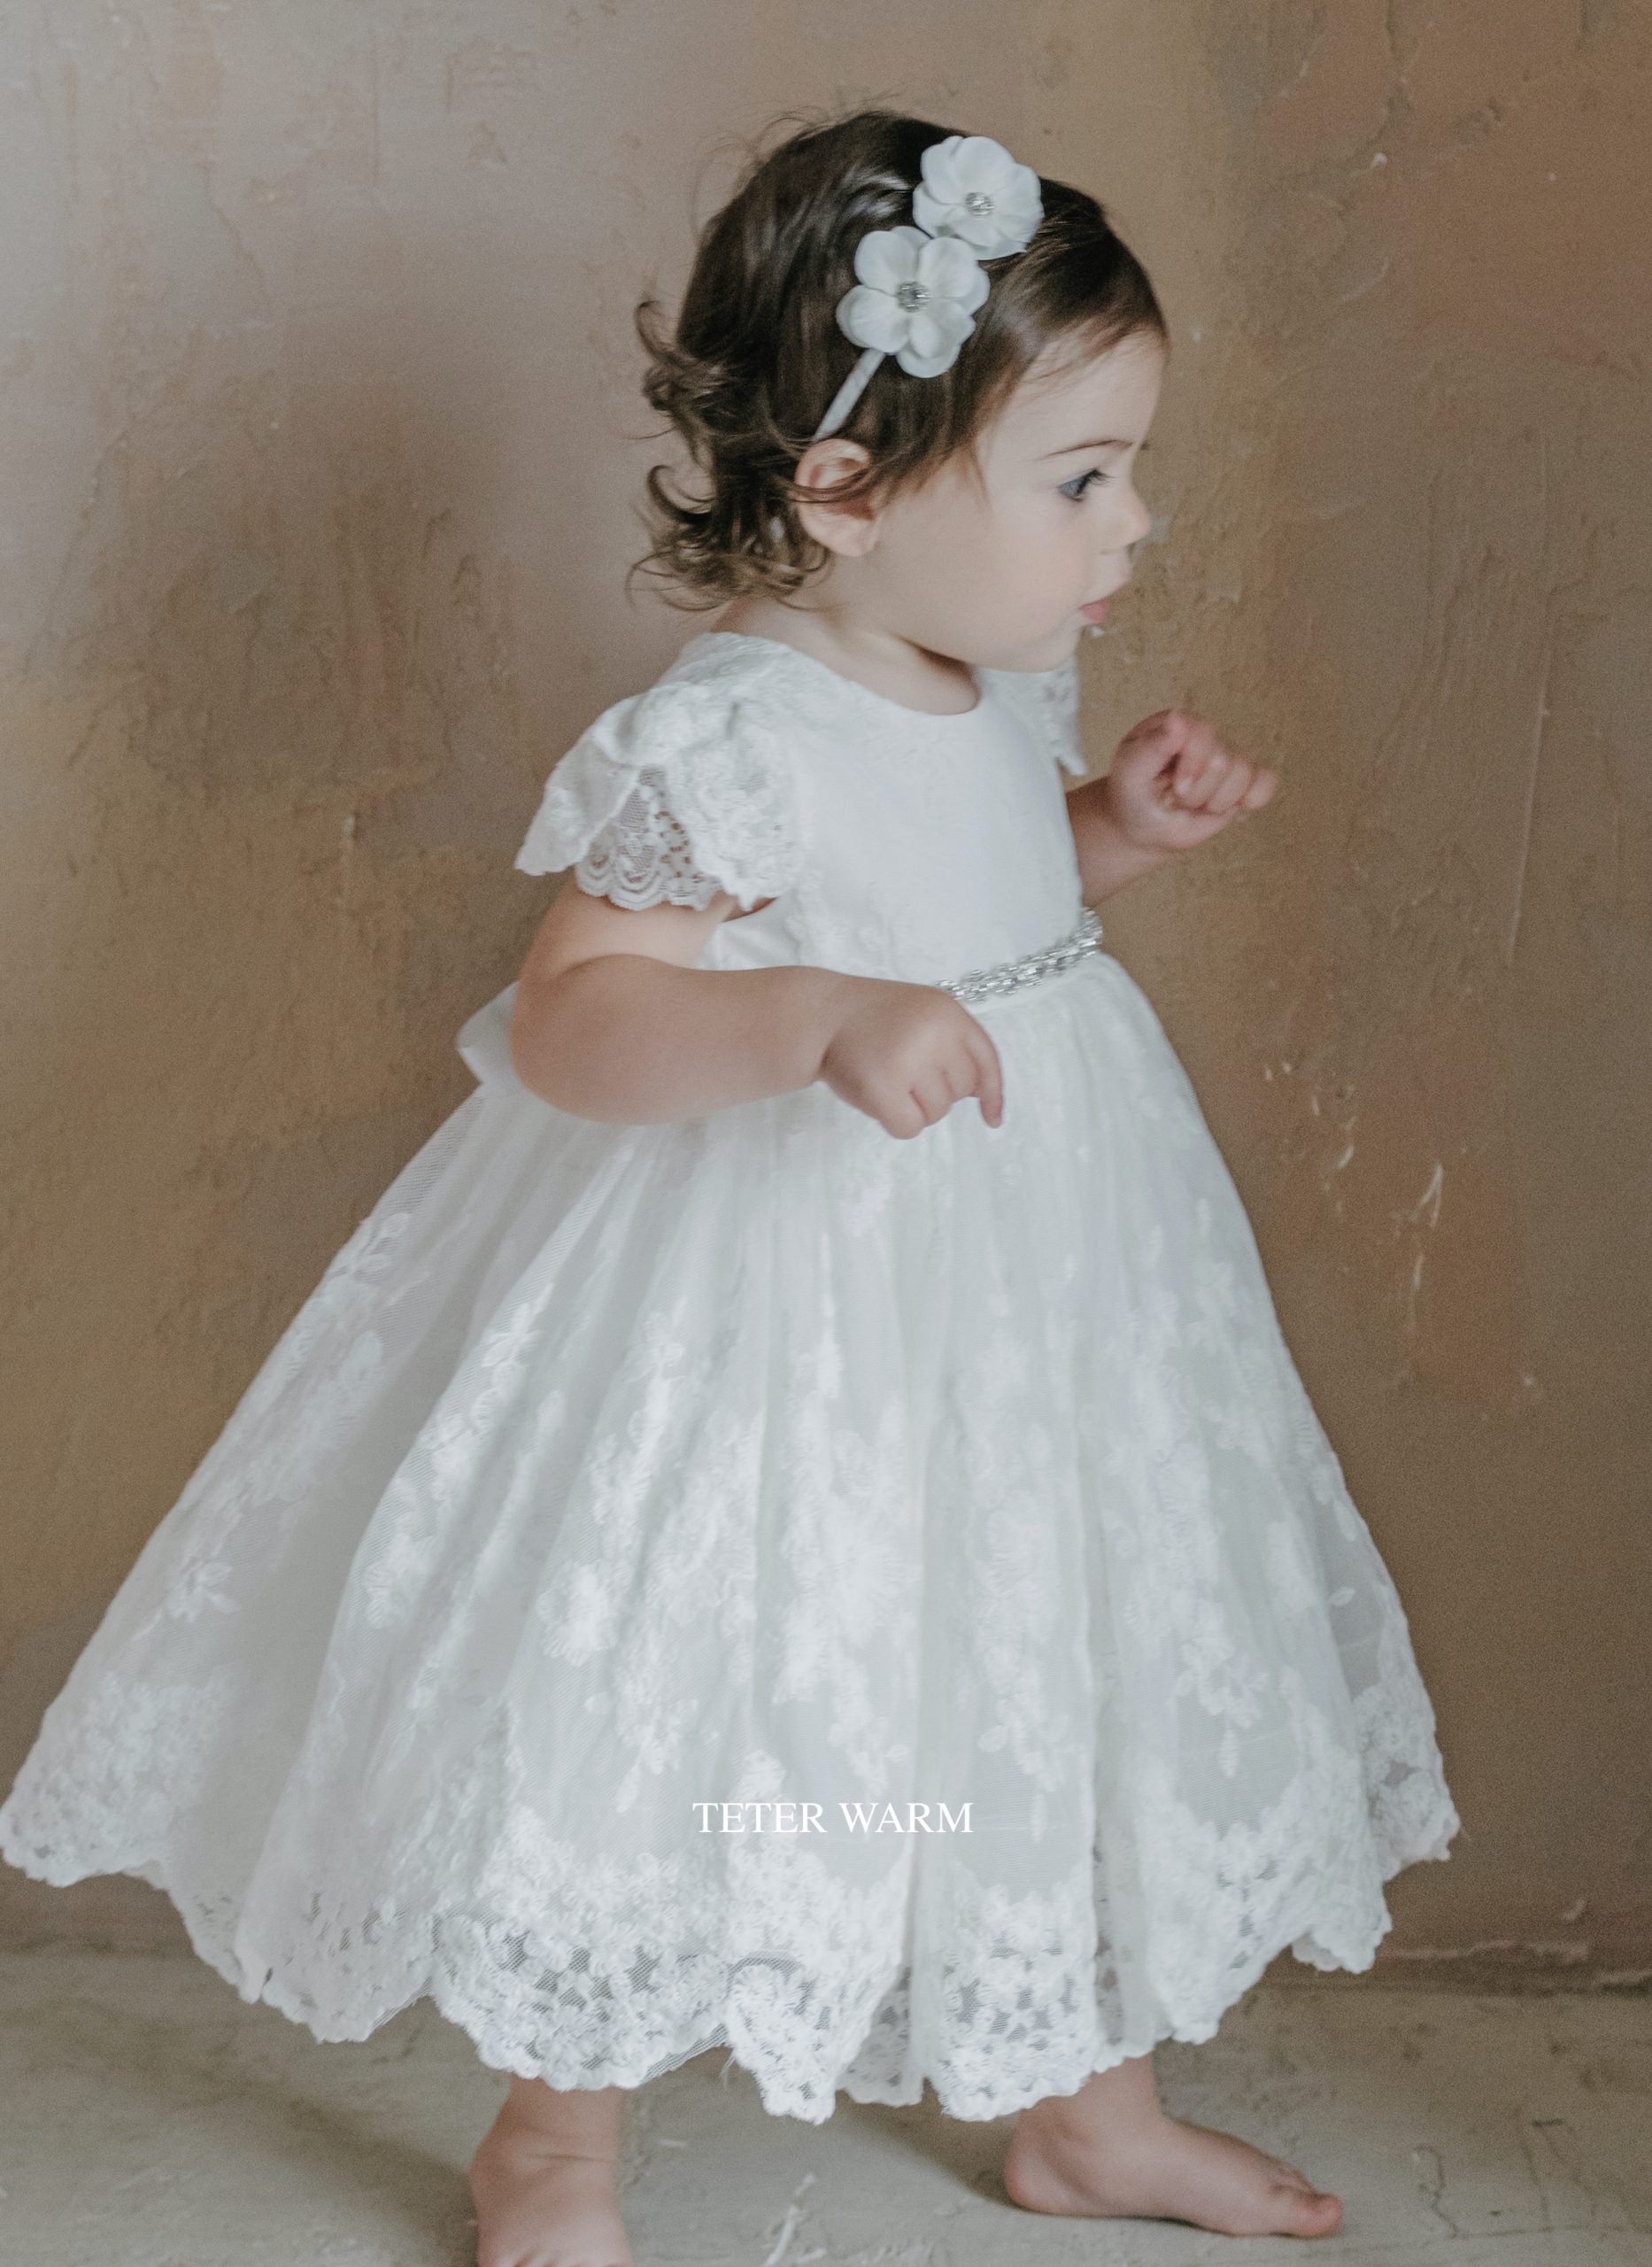 Teter Warm Baptism Christening Special Occasion Party Lace Dress For Baby